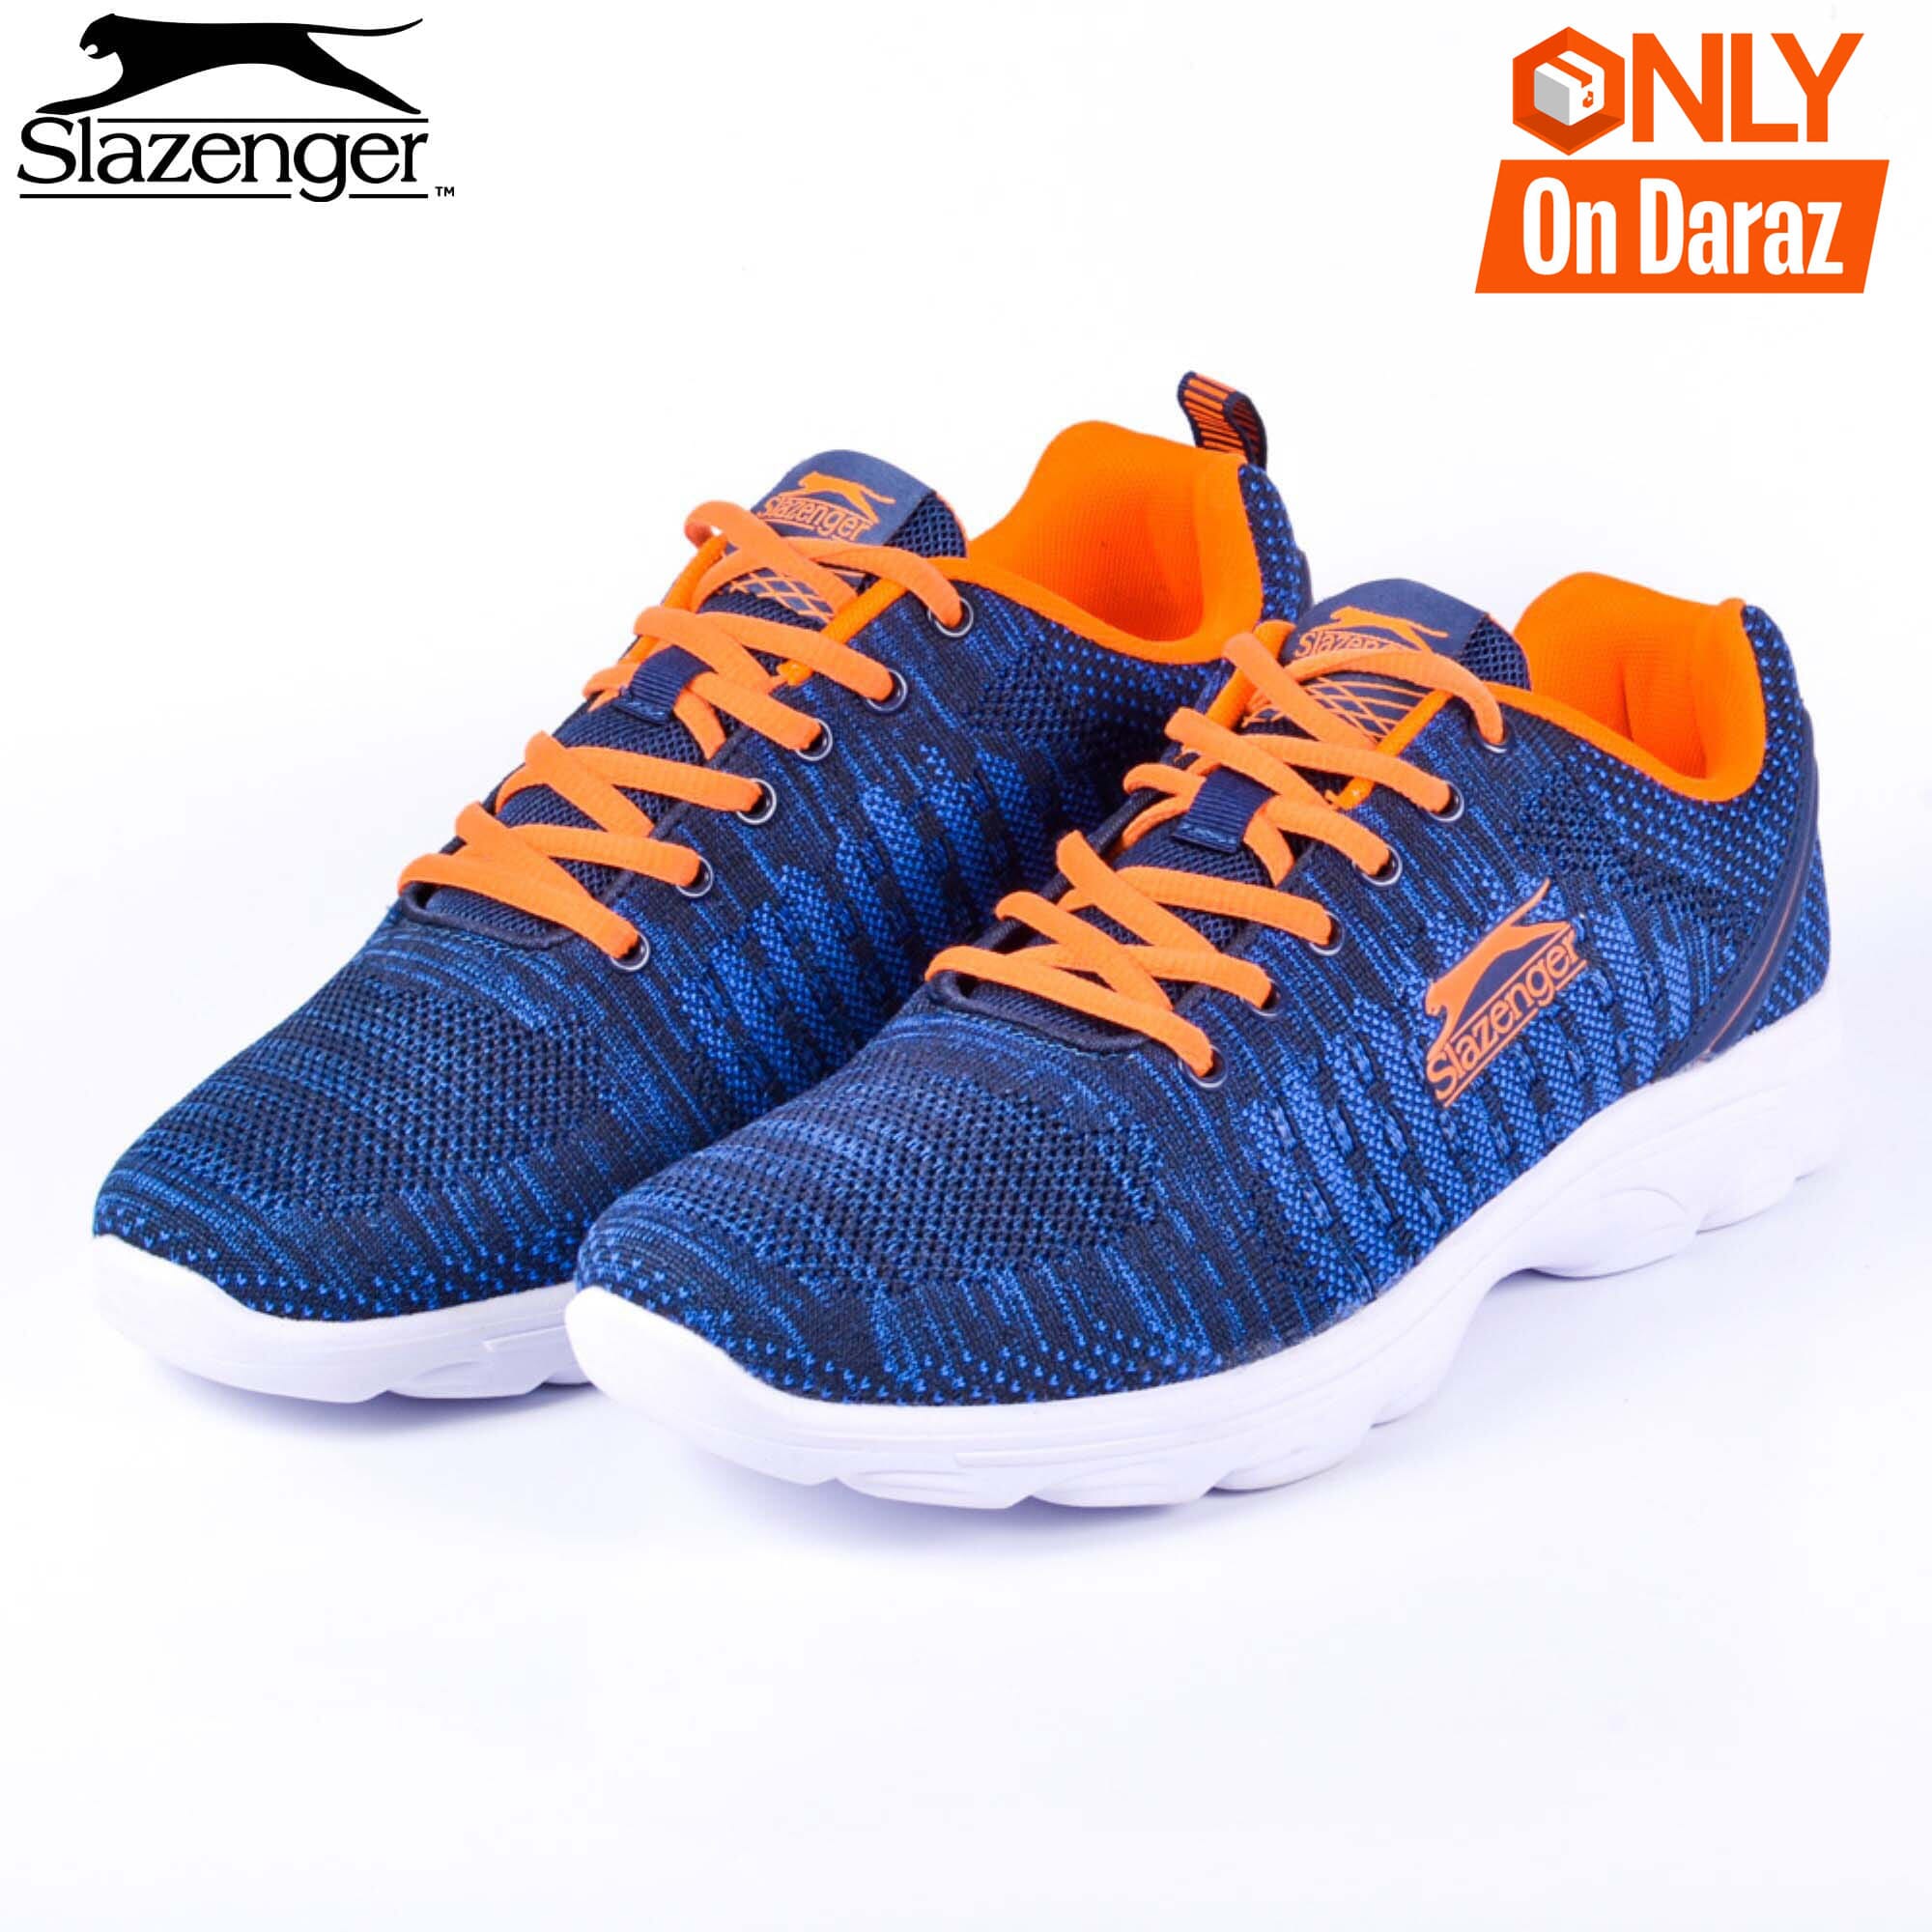 Slazenger Sneakers & Casual shoes for Men sale - discounted price |  FASHIOLA INDIA